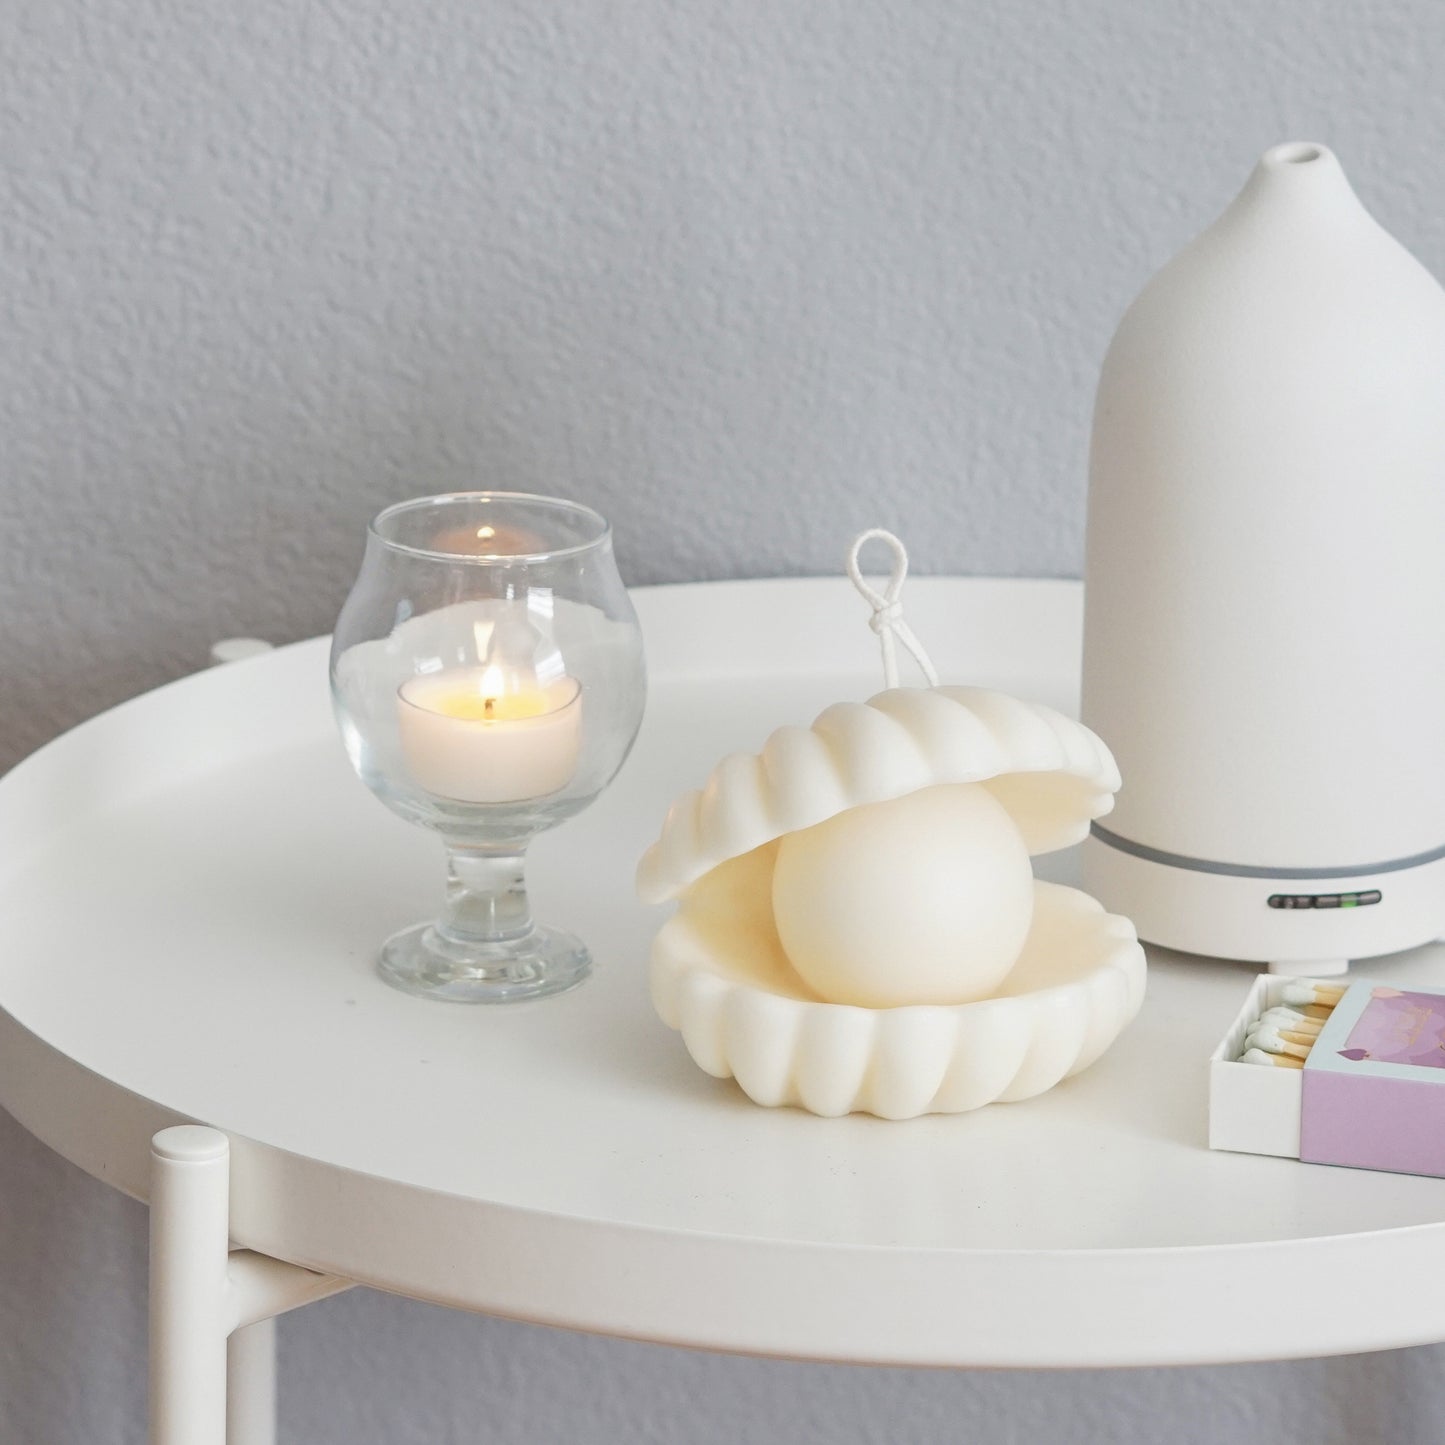 shell pearl soy pillar candle, a lit tealight candle in a mini glass, mint color matches, and diffuser on white round side table